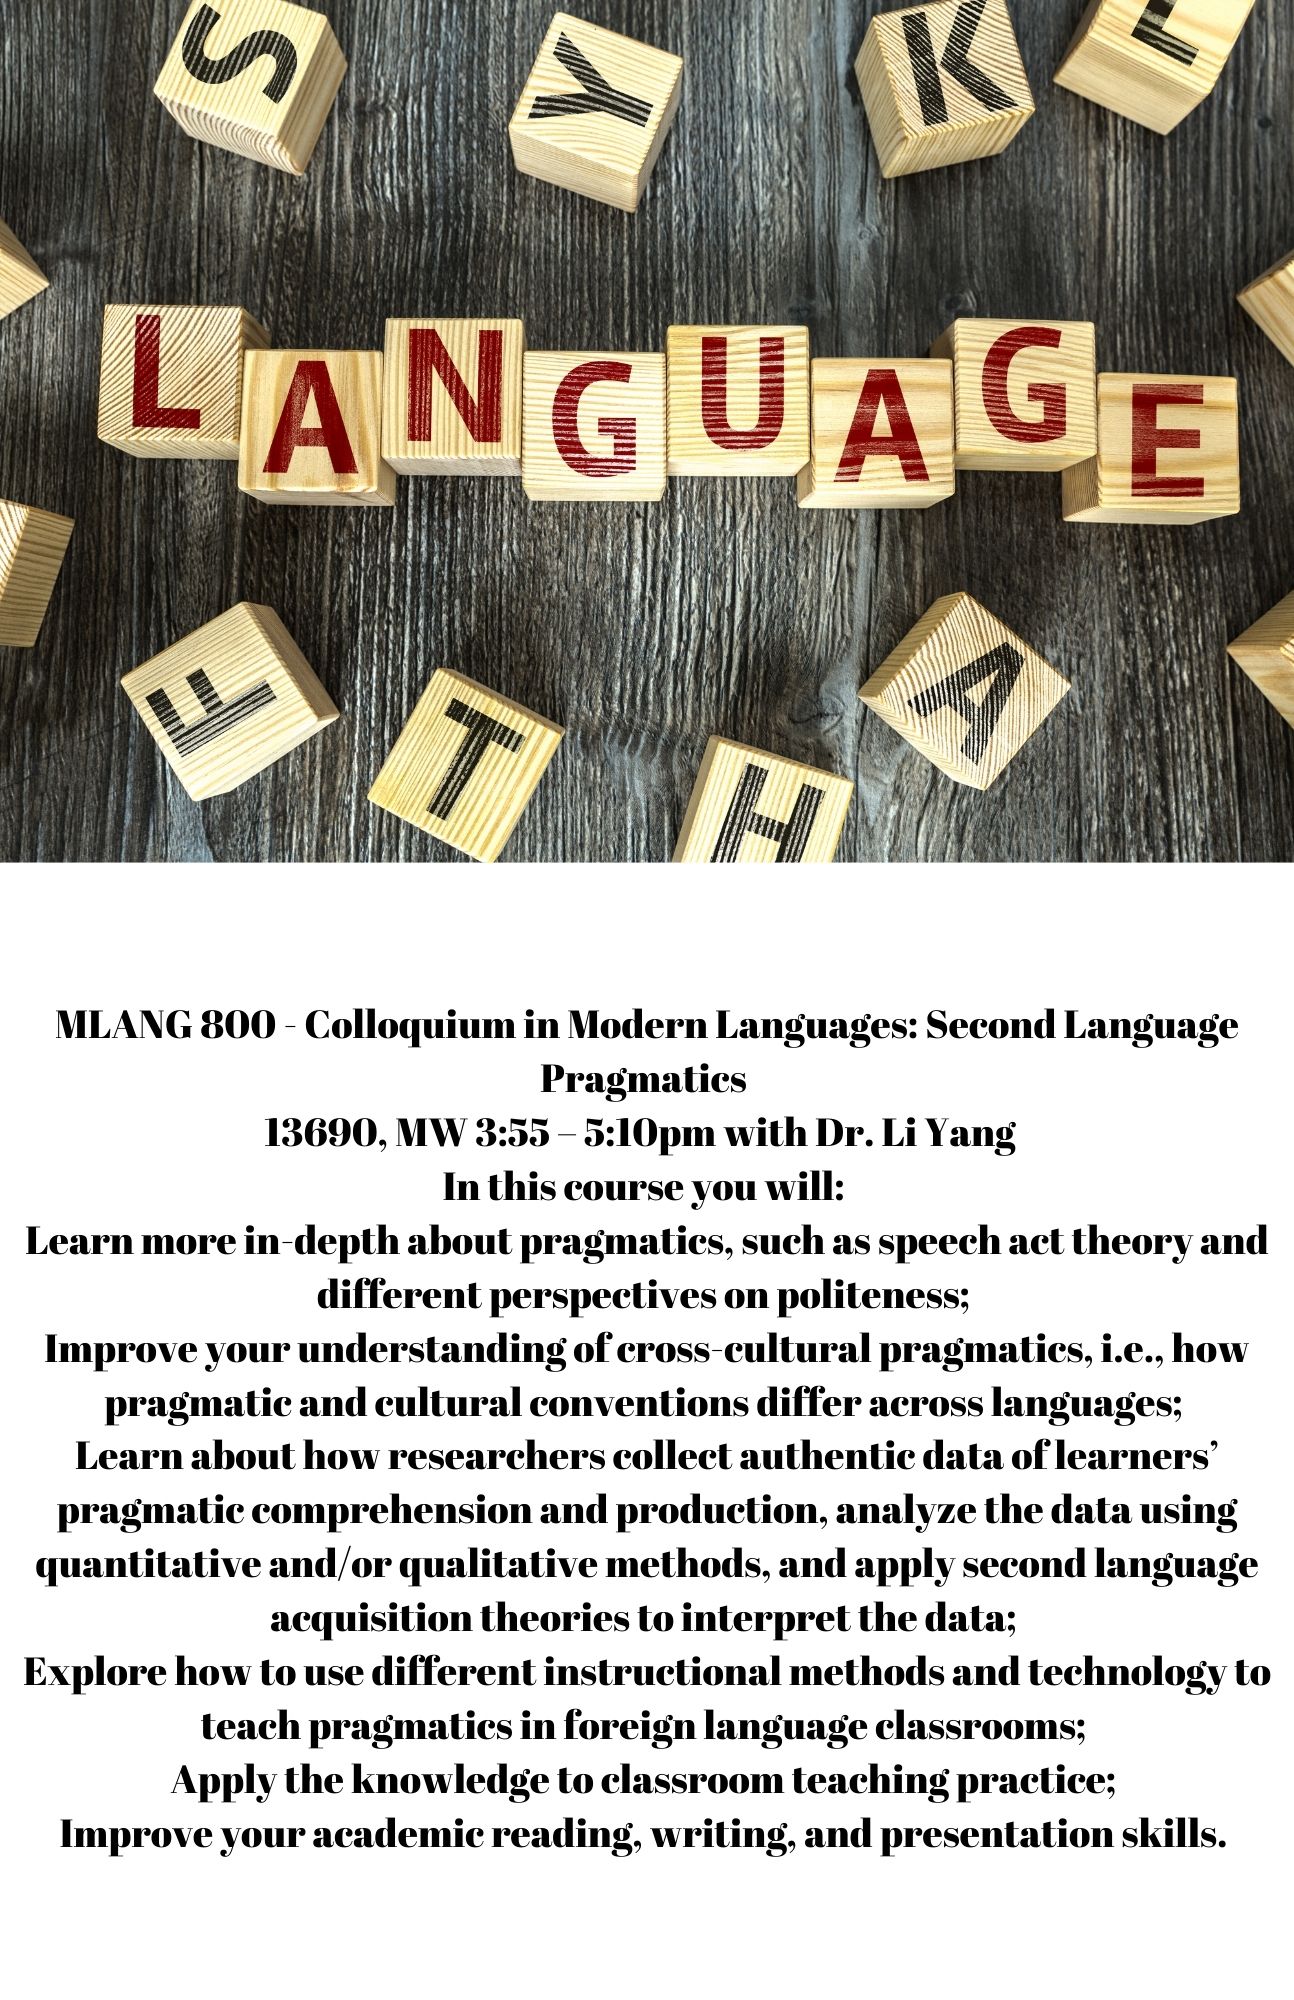 MLANG 800 - Colloquium in Modern Languages: Second Language Pragmatics  13690, MW 3:55 – 5:10pm with Dr. Li Yang   In this course you will:  Learn more in-depth about pragmatics, such as speech act theory and different perspectives on politeness;  Improve your understanding of cross-cultural pragmatics, i.e., how pragmatic and cultural conventions differ across languages;  Learn about how researchers collect authentic data of learners’ pragmatic comprehension and production, analyze the data using quantitative and/or qualitative methods, and apply second language acquisition theories to interpret the data;  Explore how to use different instructional methods and technology to teach pragmatics in foreign language classrooms;  Apply the knowledge to classroom teaching practice;  Improve your academic reading, writing, and presentation skills. 